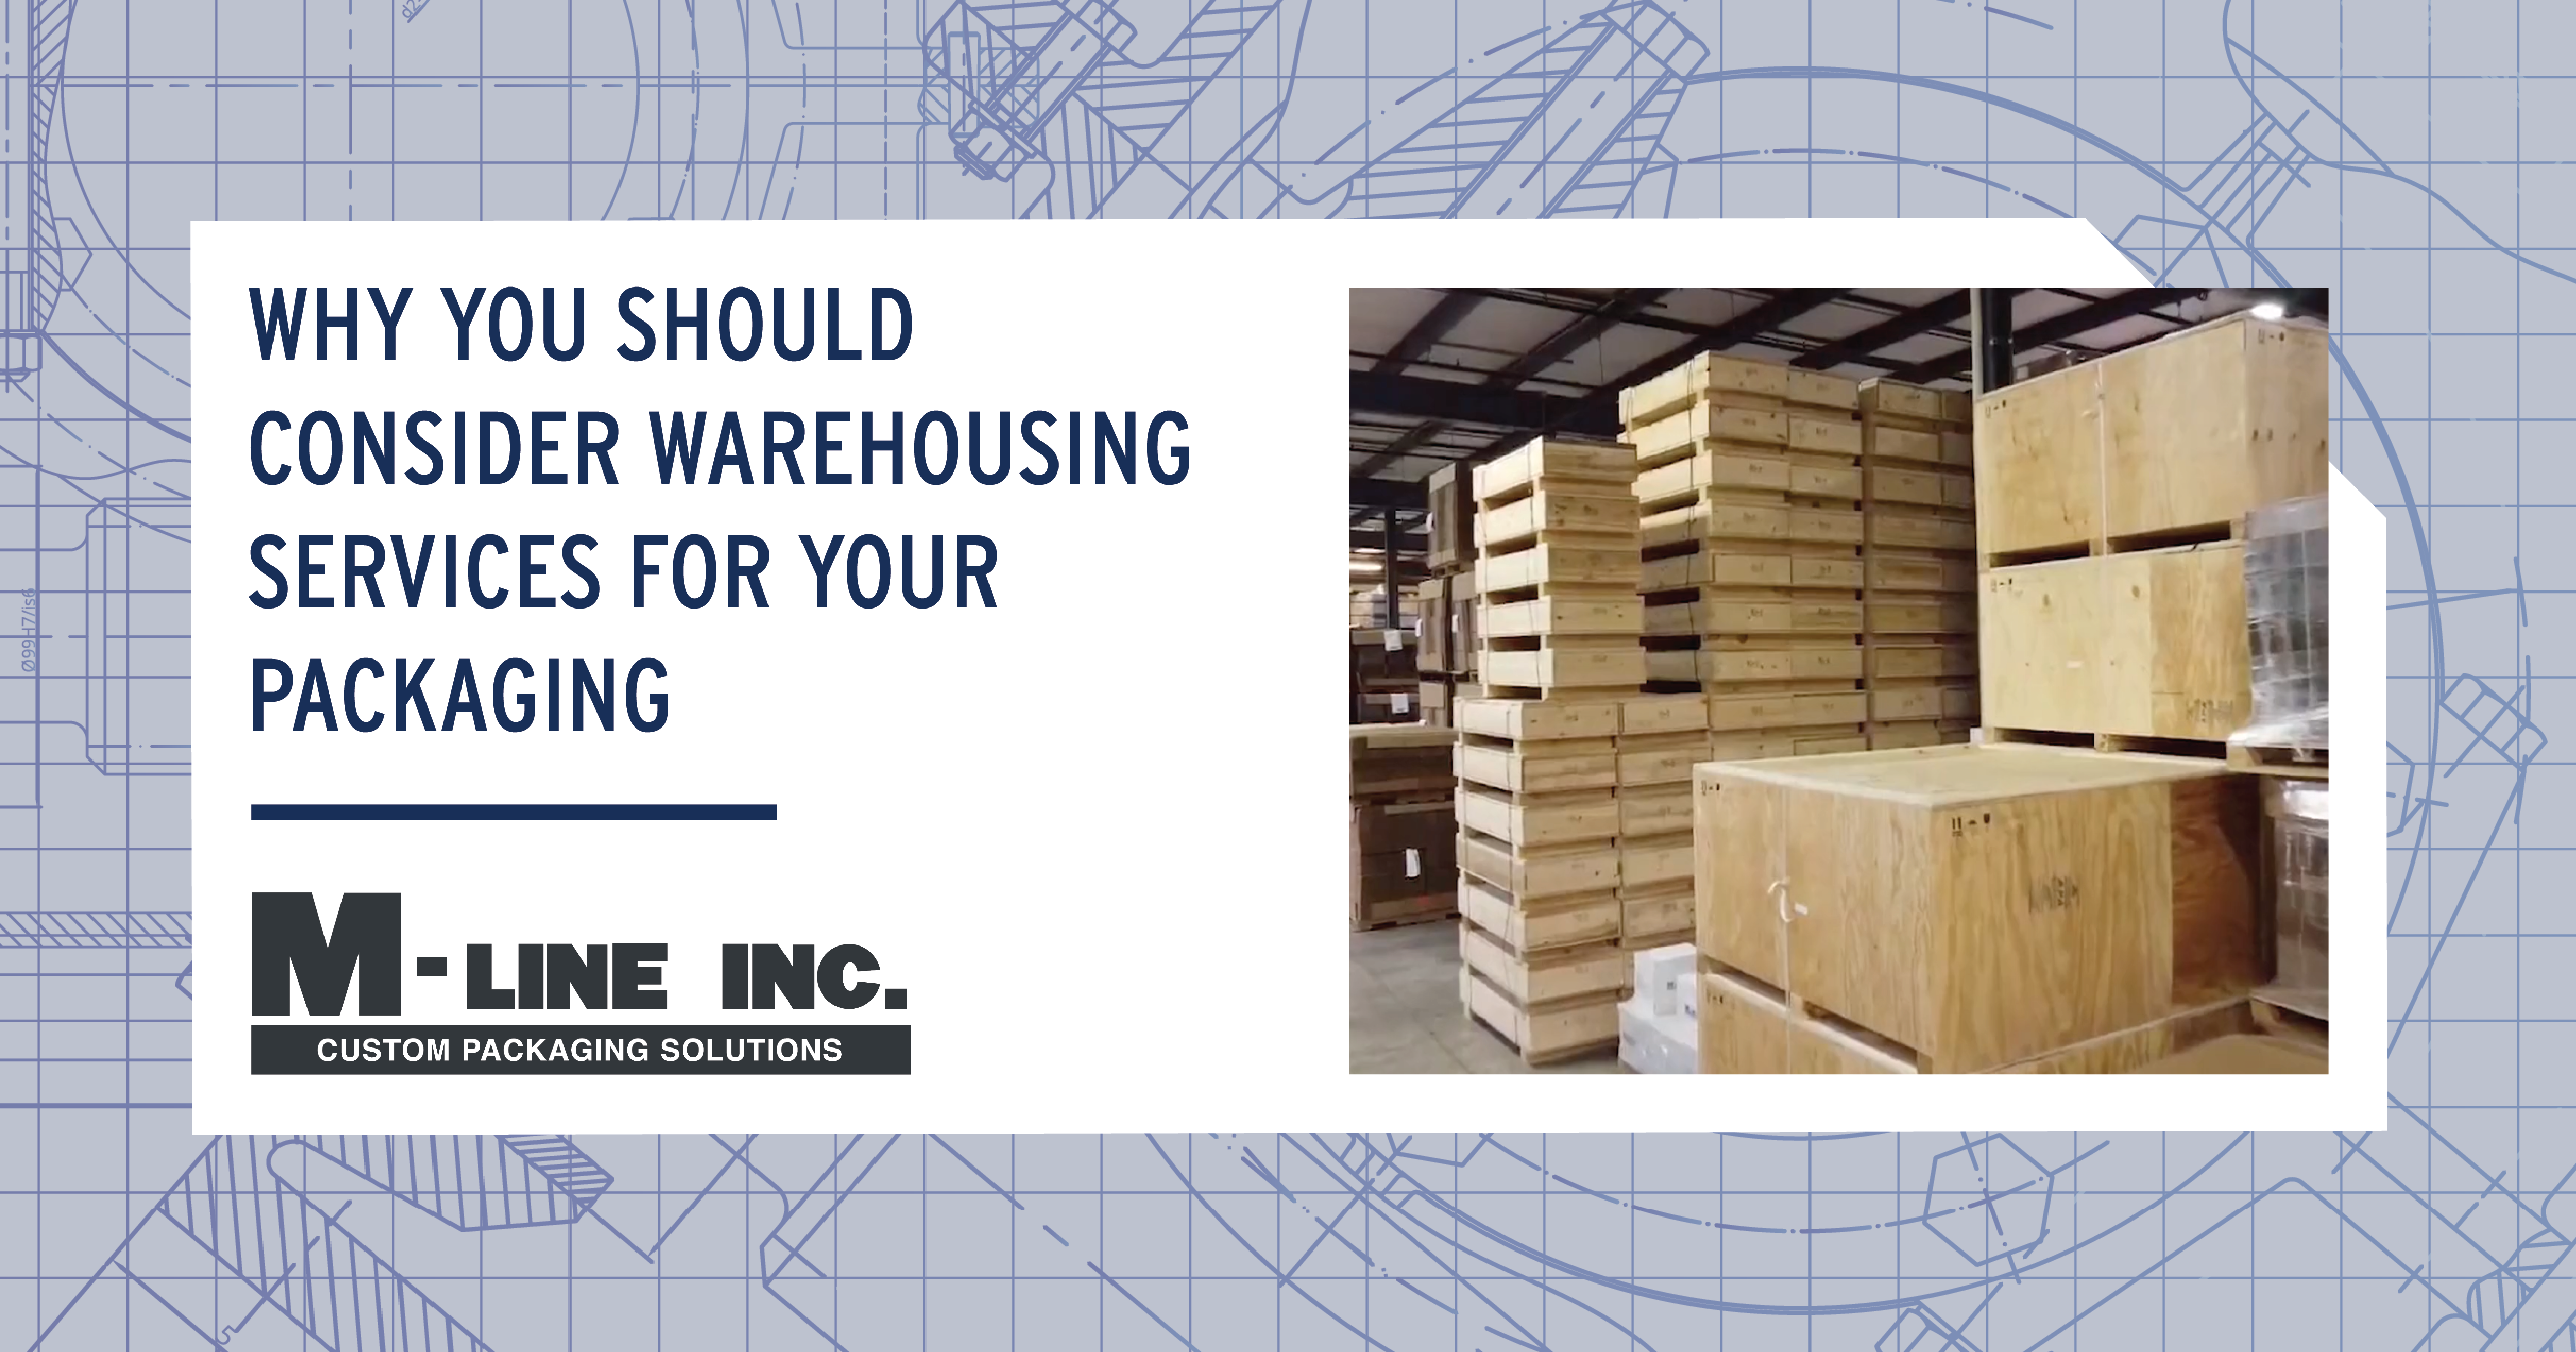 Why You Should Consider Warehousing Services for Your Packaging